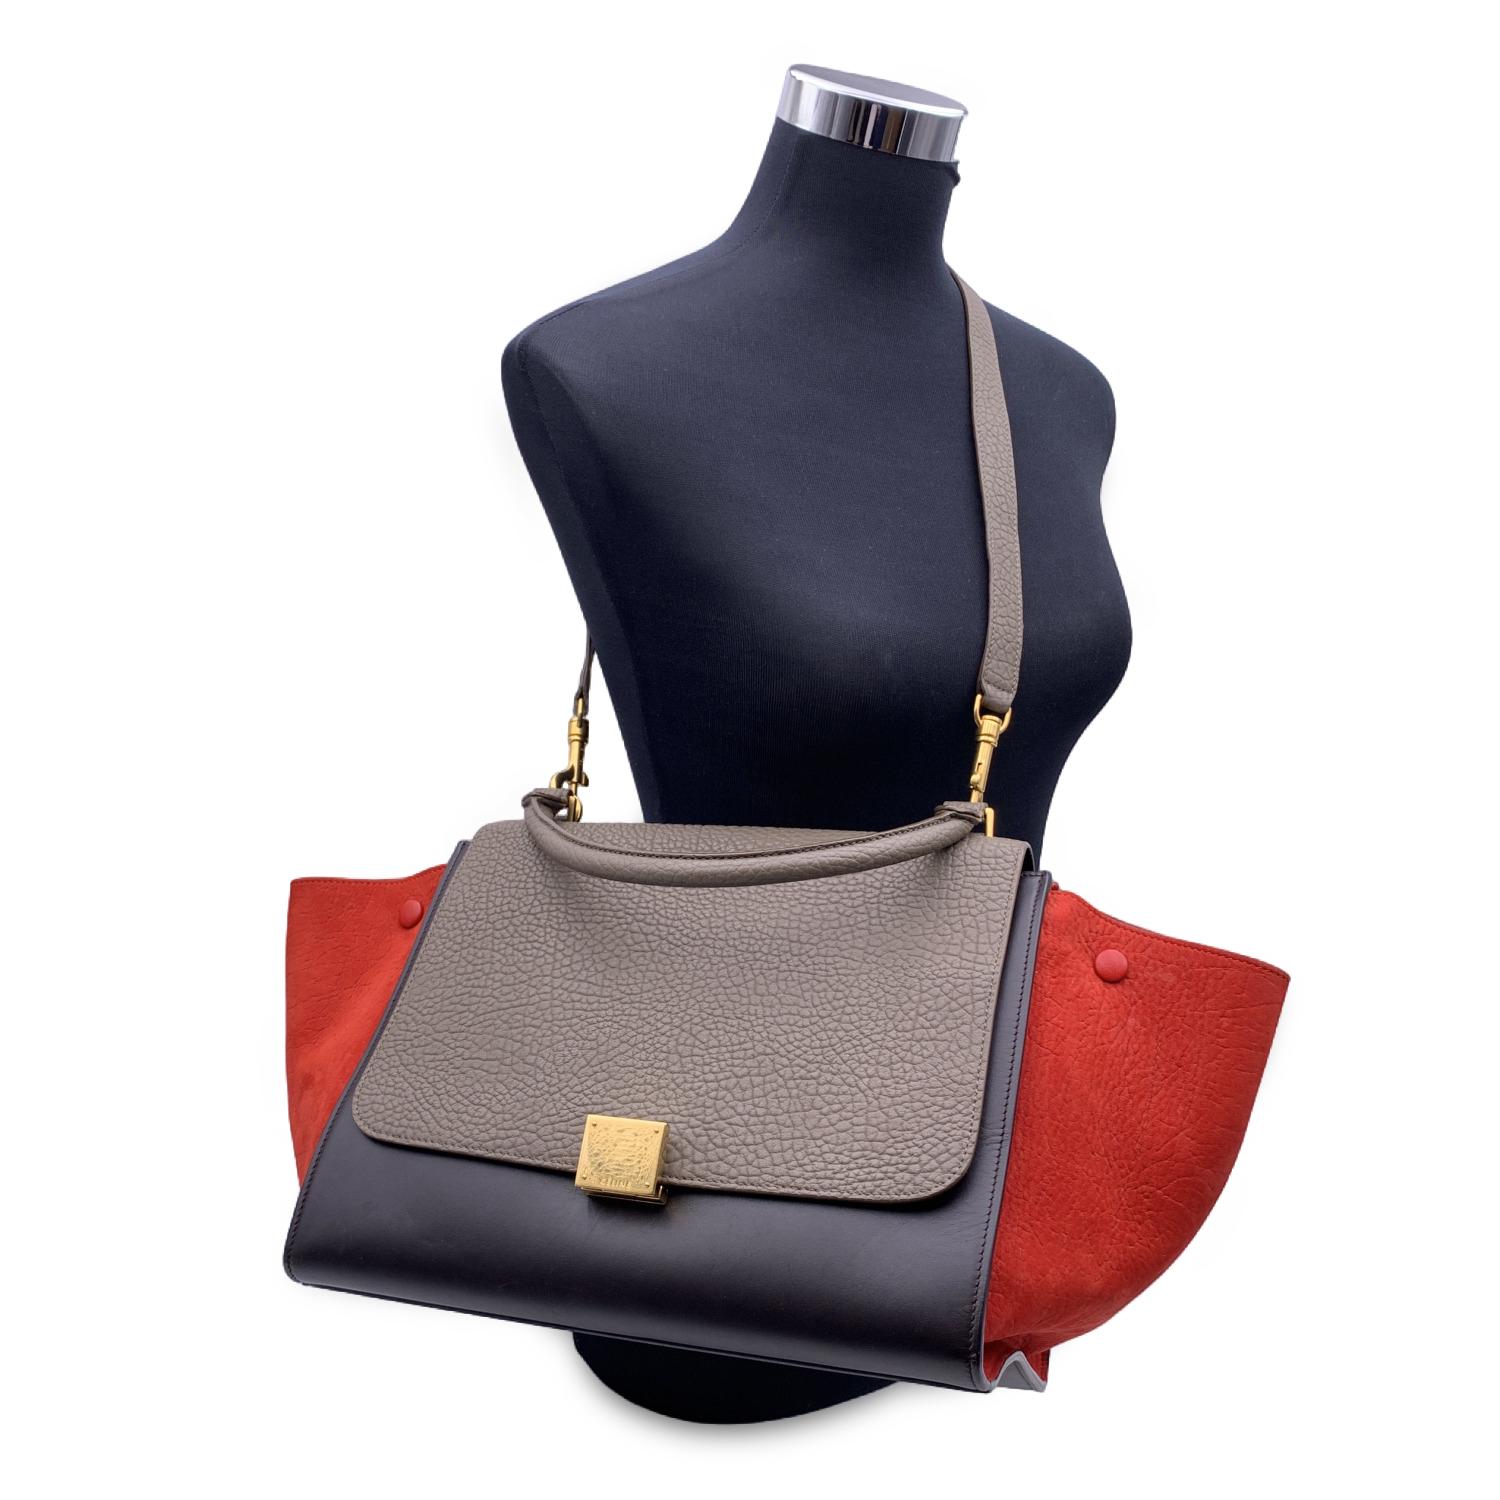 This beautiful Bag will come with a Certificate of Authenticity provided by Entrupy. The certificate will be provided at no further cost.

Beautiful Celine 'Trapeze' satchel bag. Crafted from leather in red, blue, and grey color. Gold metal